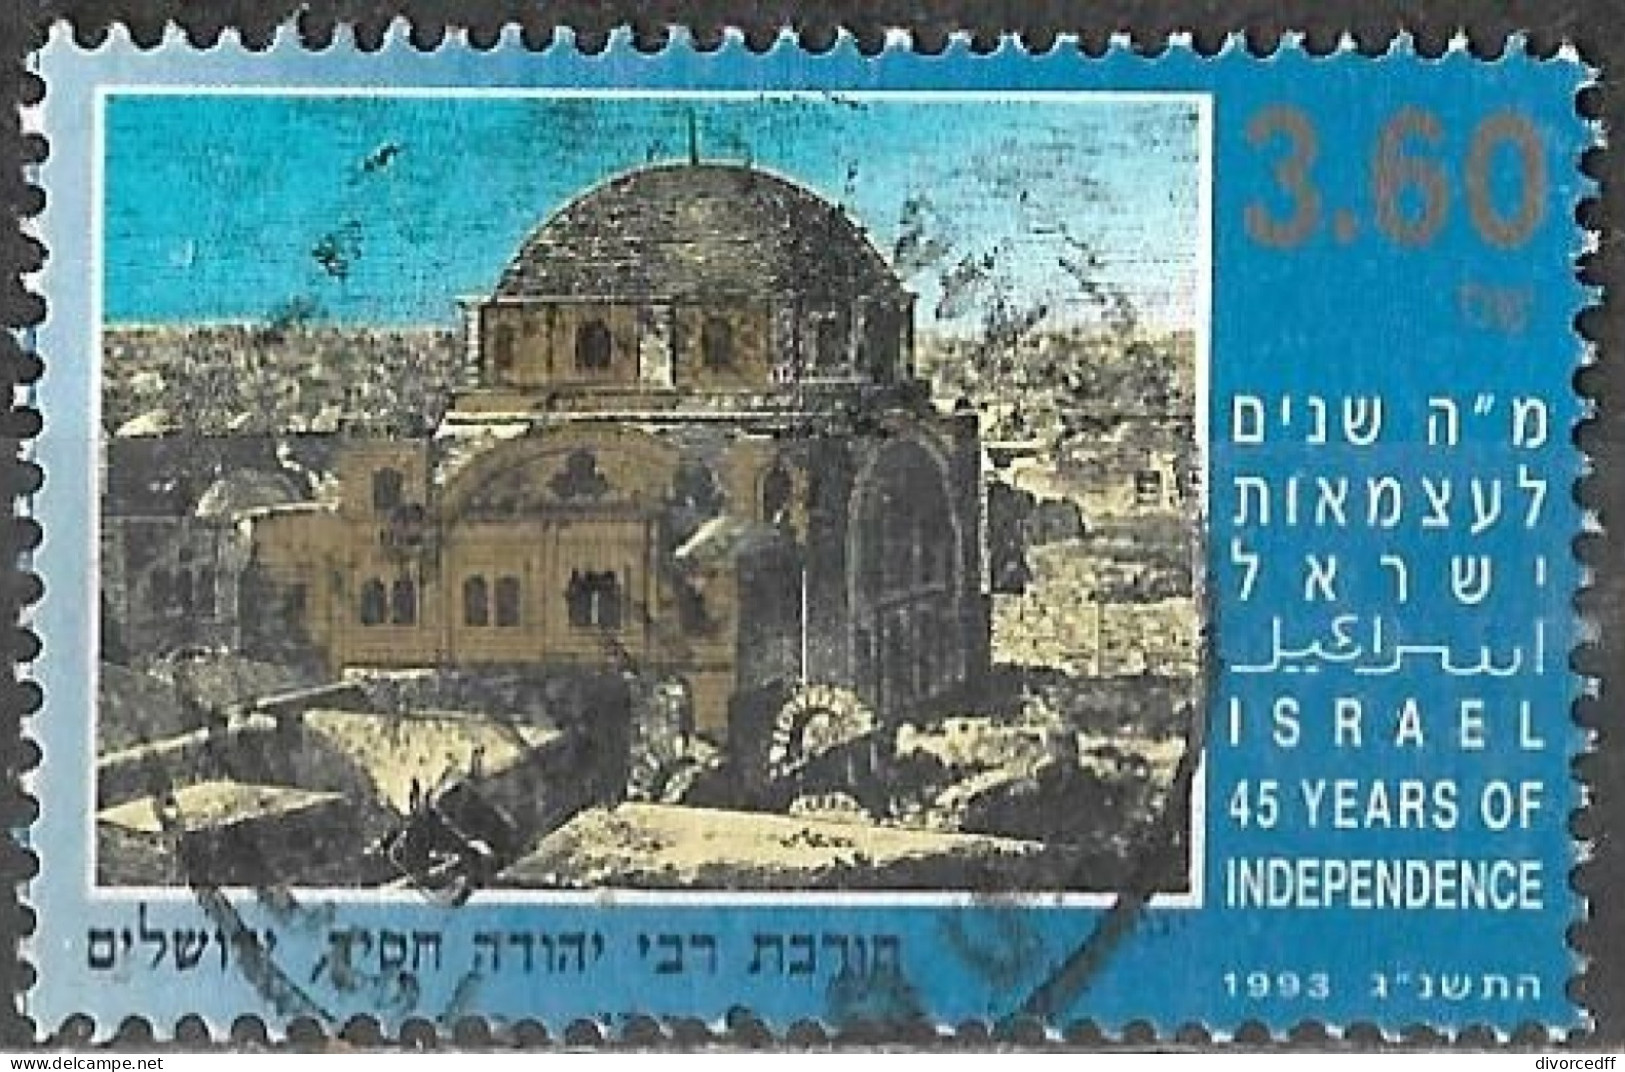 Israel 1993 Used Stamp Israel 45 Years Of Independence Architecture [INLT56] - Usados (sin Tab)